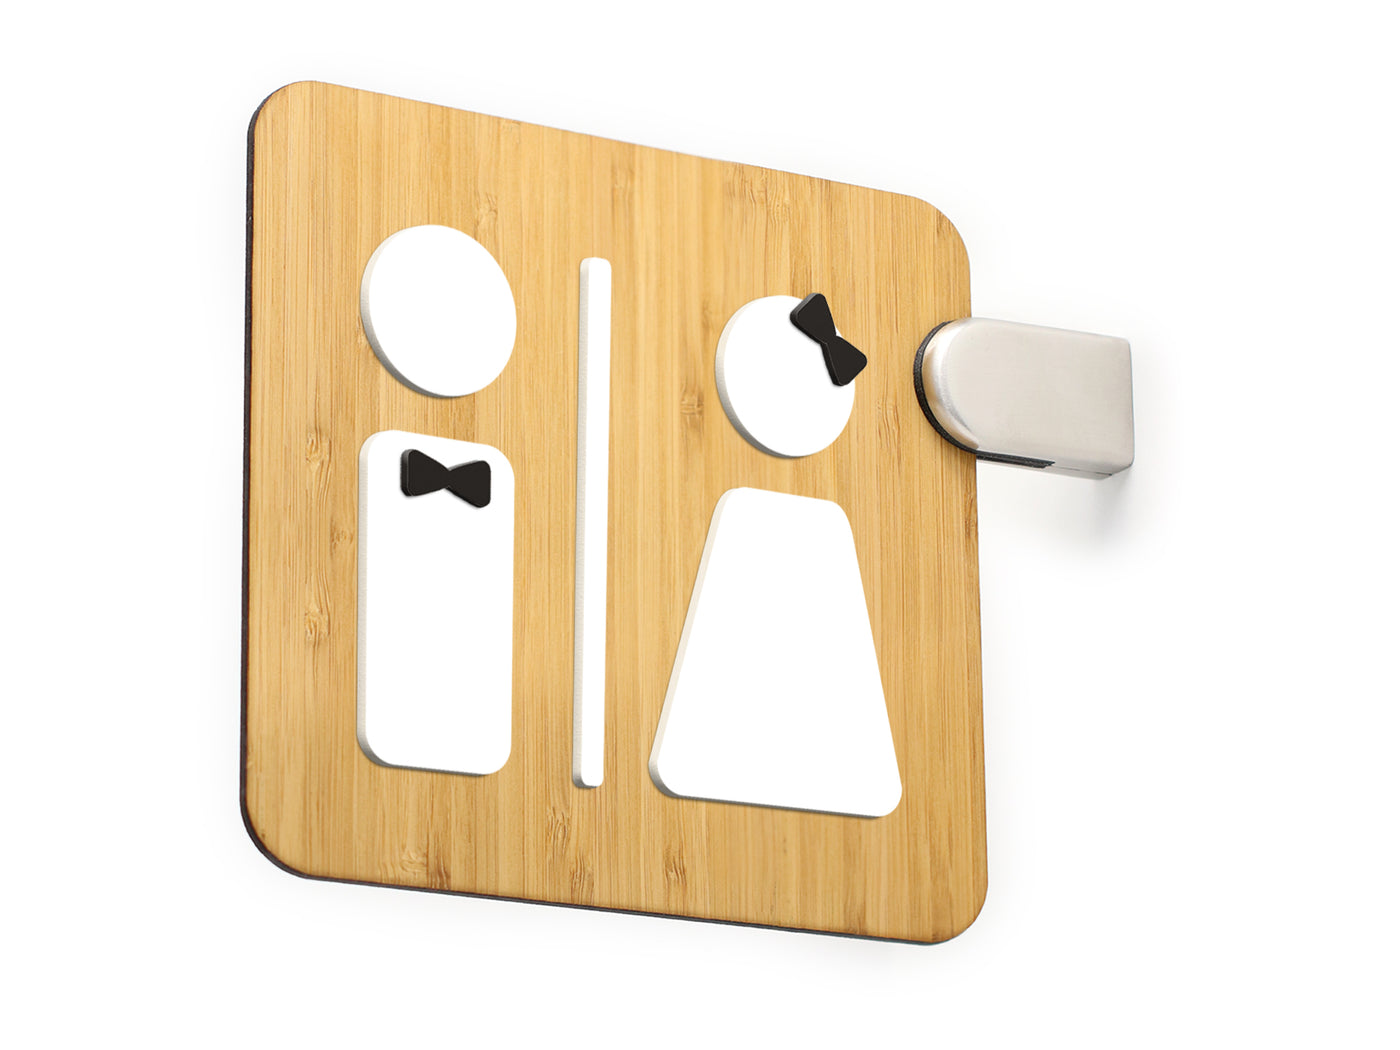 Styled knot - Restroom double sided Projecting sign - Symbols of your choice